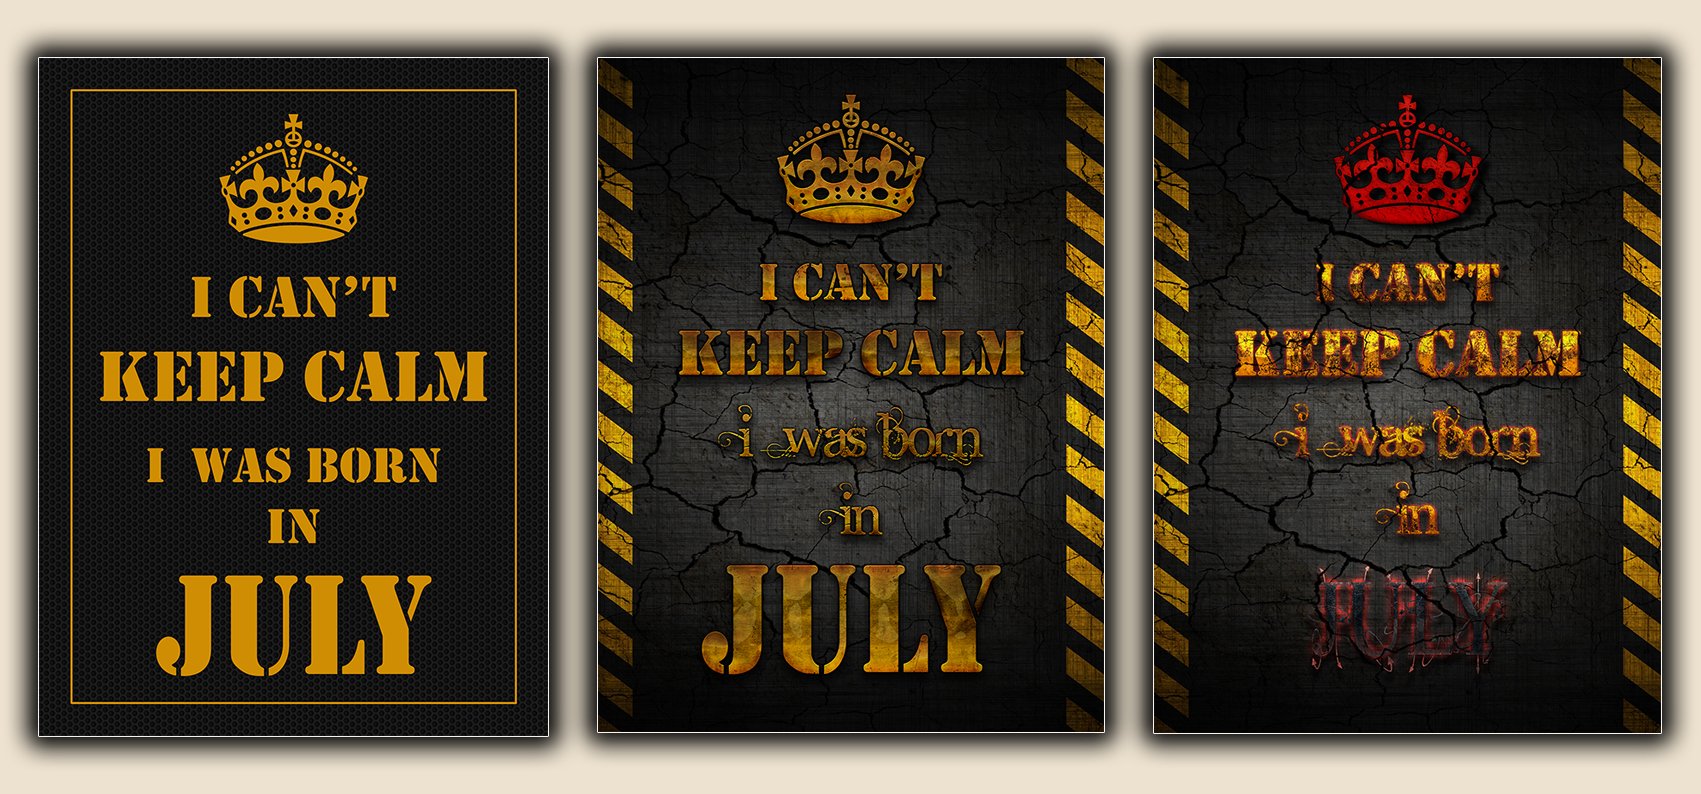 I Can't Keep Calm - I was Born in July